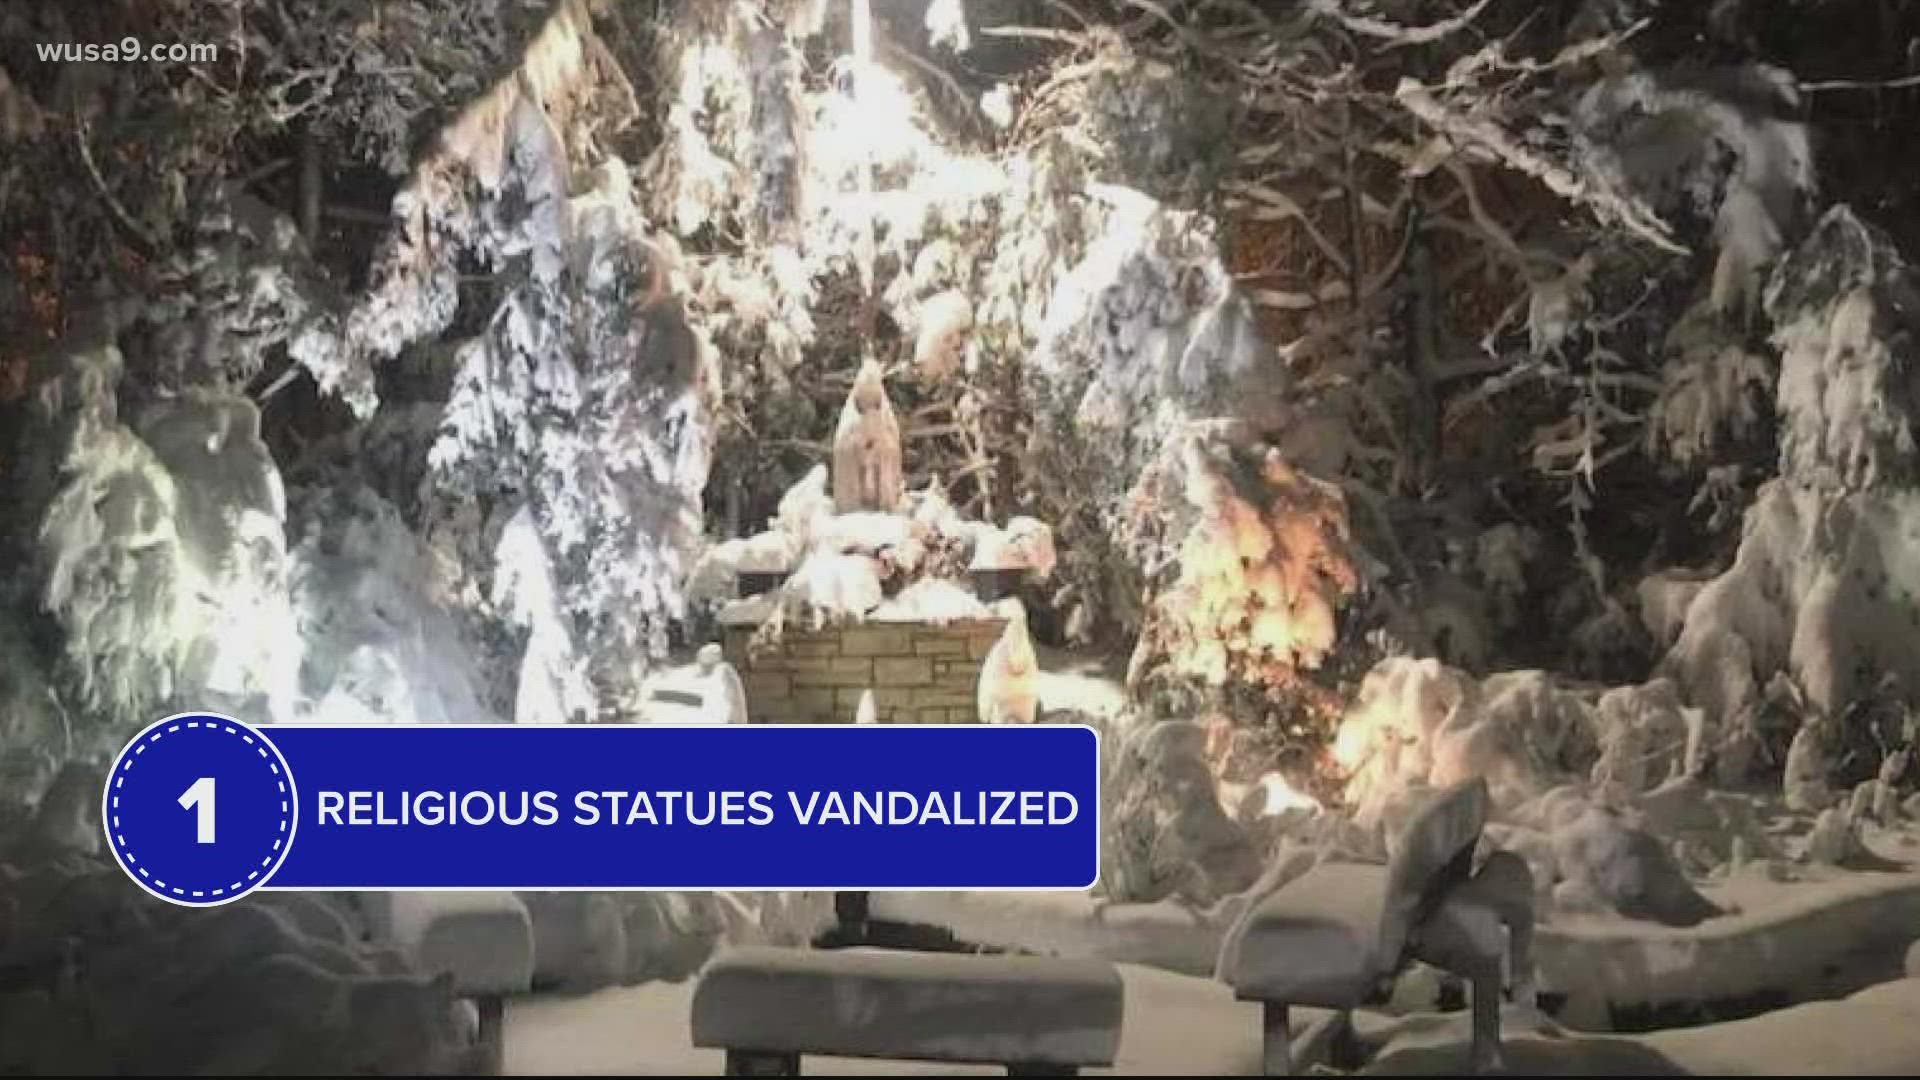 A man found a statue of the Blessed Mother and three other statues irreparably damaged Tuesday morning.